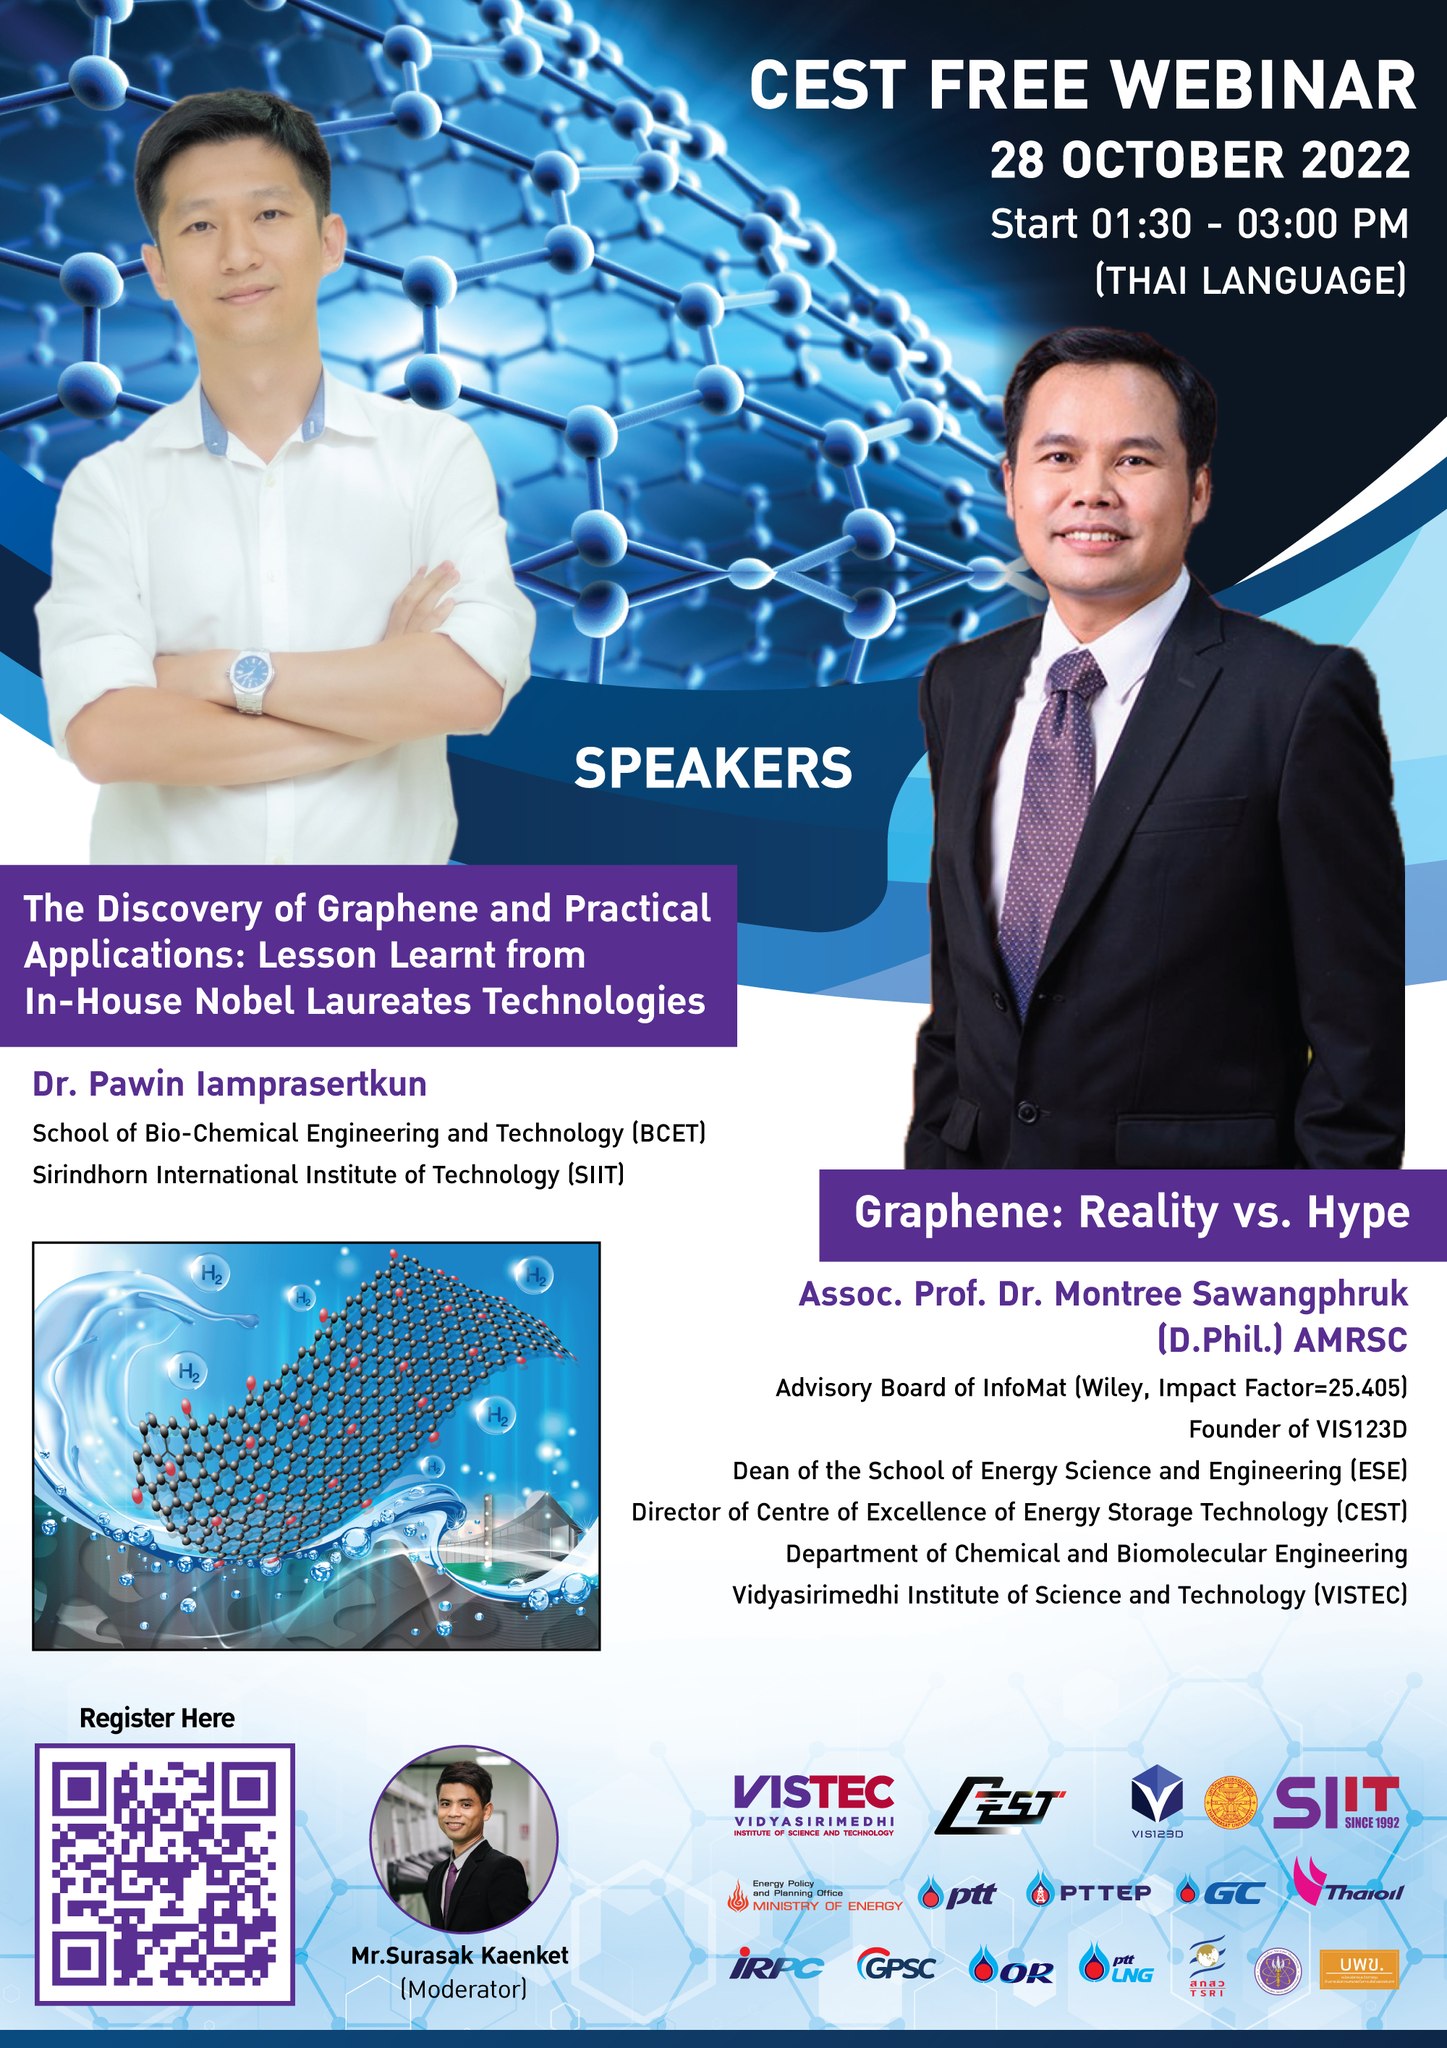 CEST FREE WEBINAR !!!  Event Date: 28 October 2022 Event Time: 01:30 - 03:00 PM (THAI LANGUAGE)